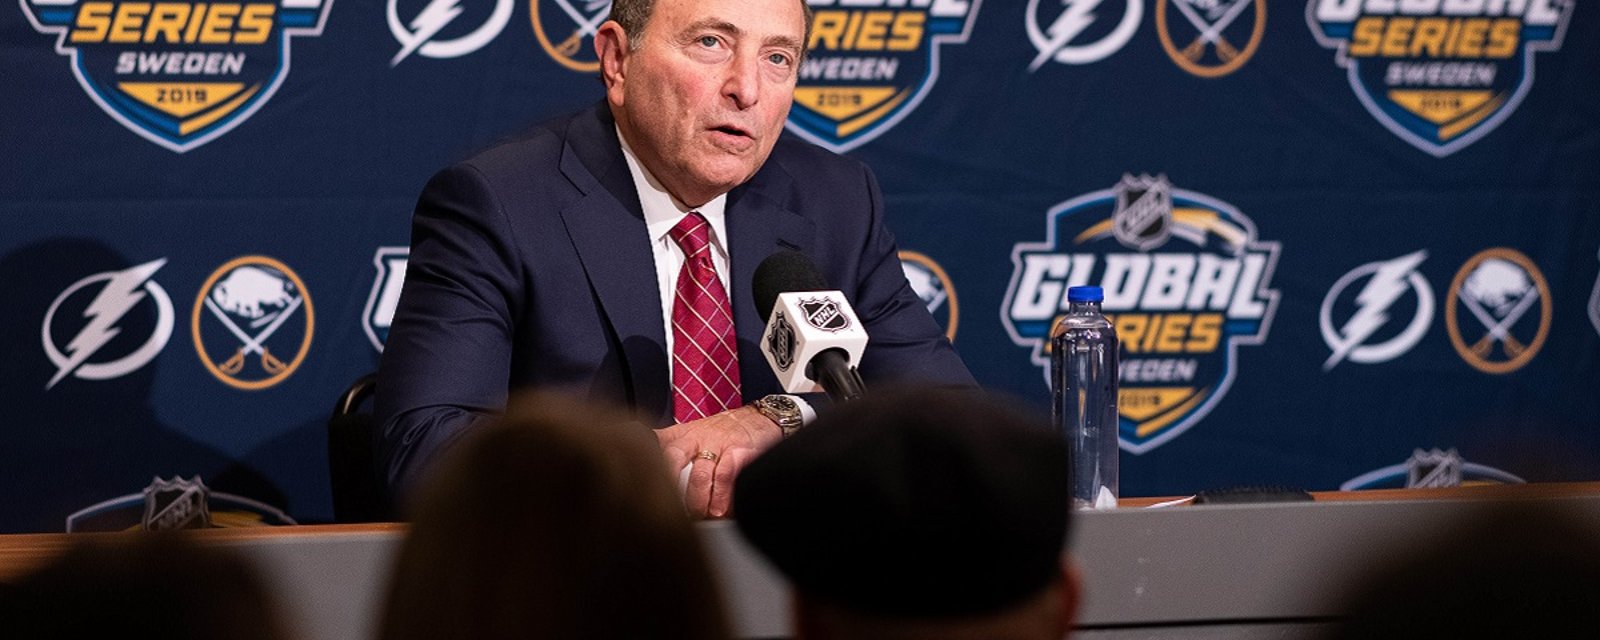 ICYMI: NHL narrows down potential host cities to 10 candidates.